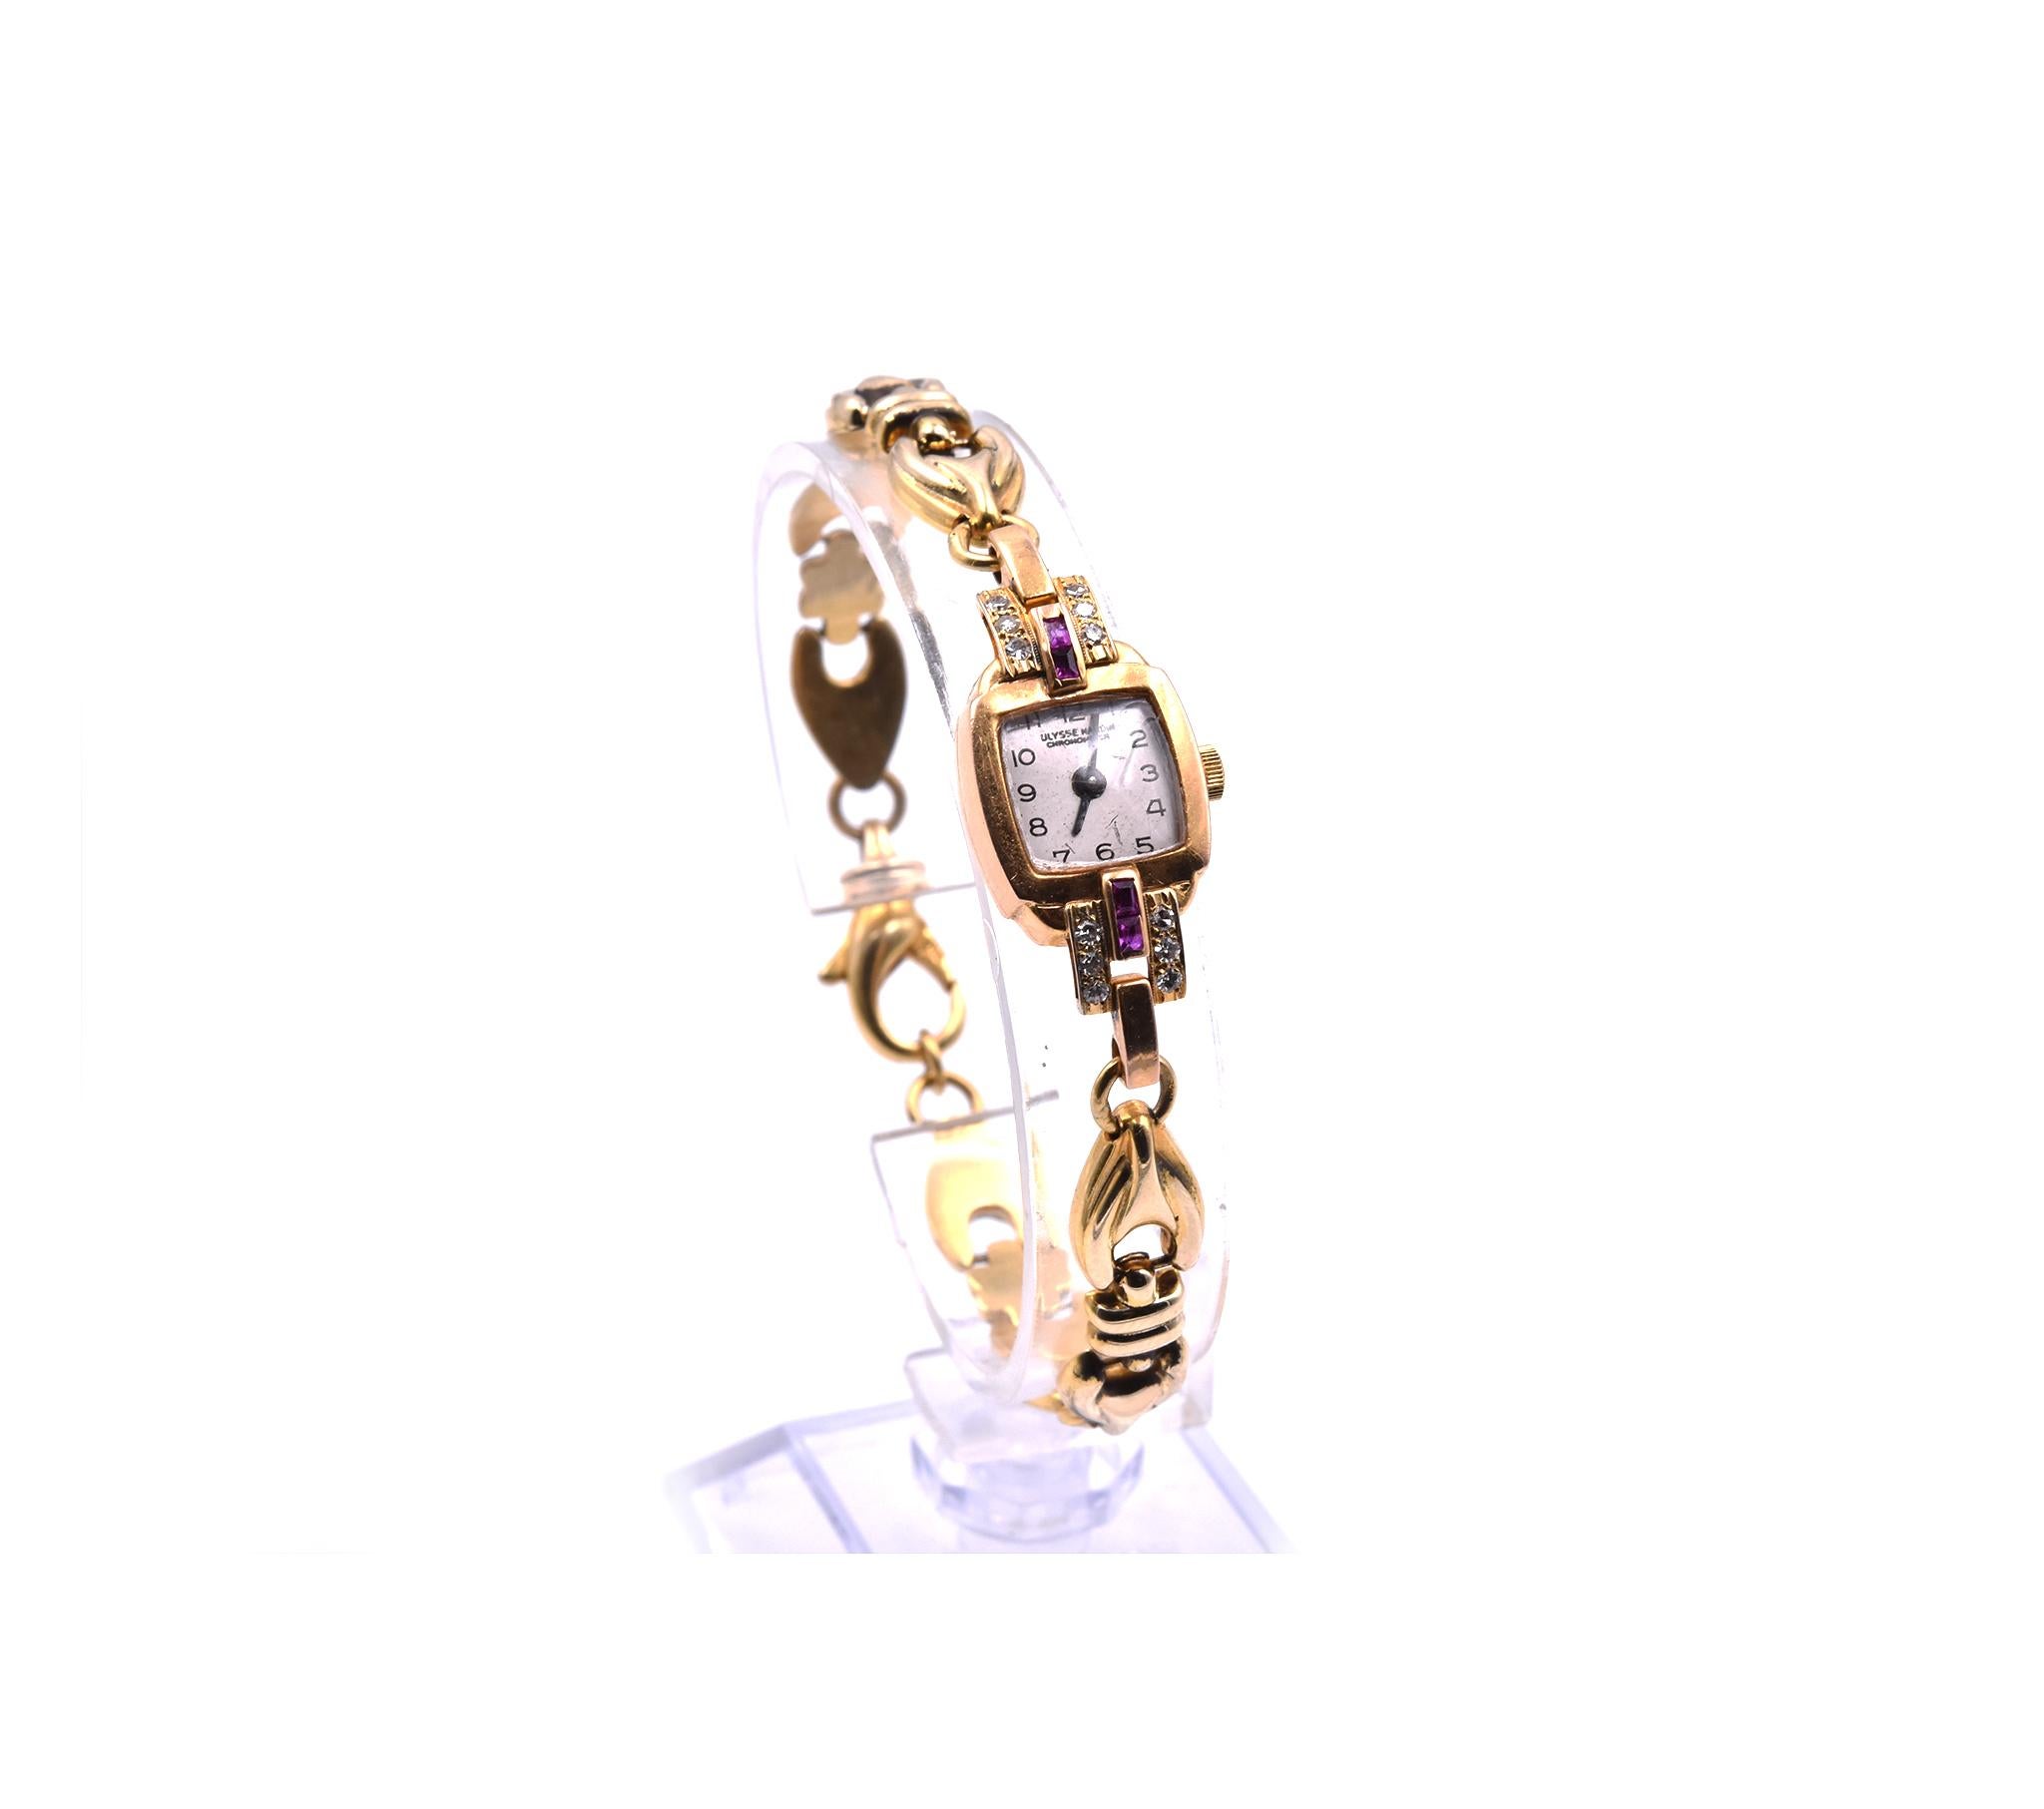 Movement: wind
Function: hours, minutes, small seconds
Case: cushion style 14mm by 18mm 14k yellow gold case, plastic crystal, pull/push crown
Band: 14k yellow gold bracelet with lobster clasp
Dial: silver dial with black Arabic numerals
Movement#: